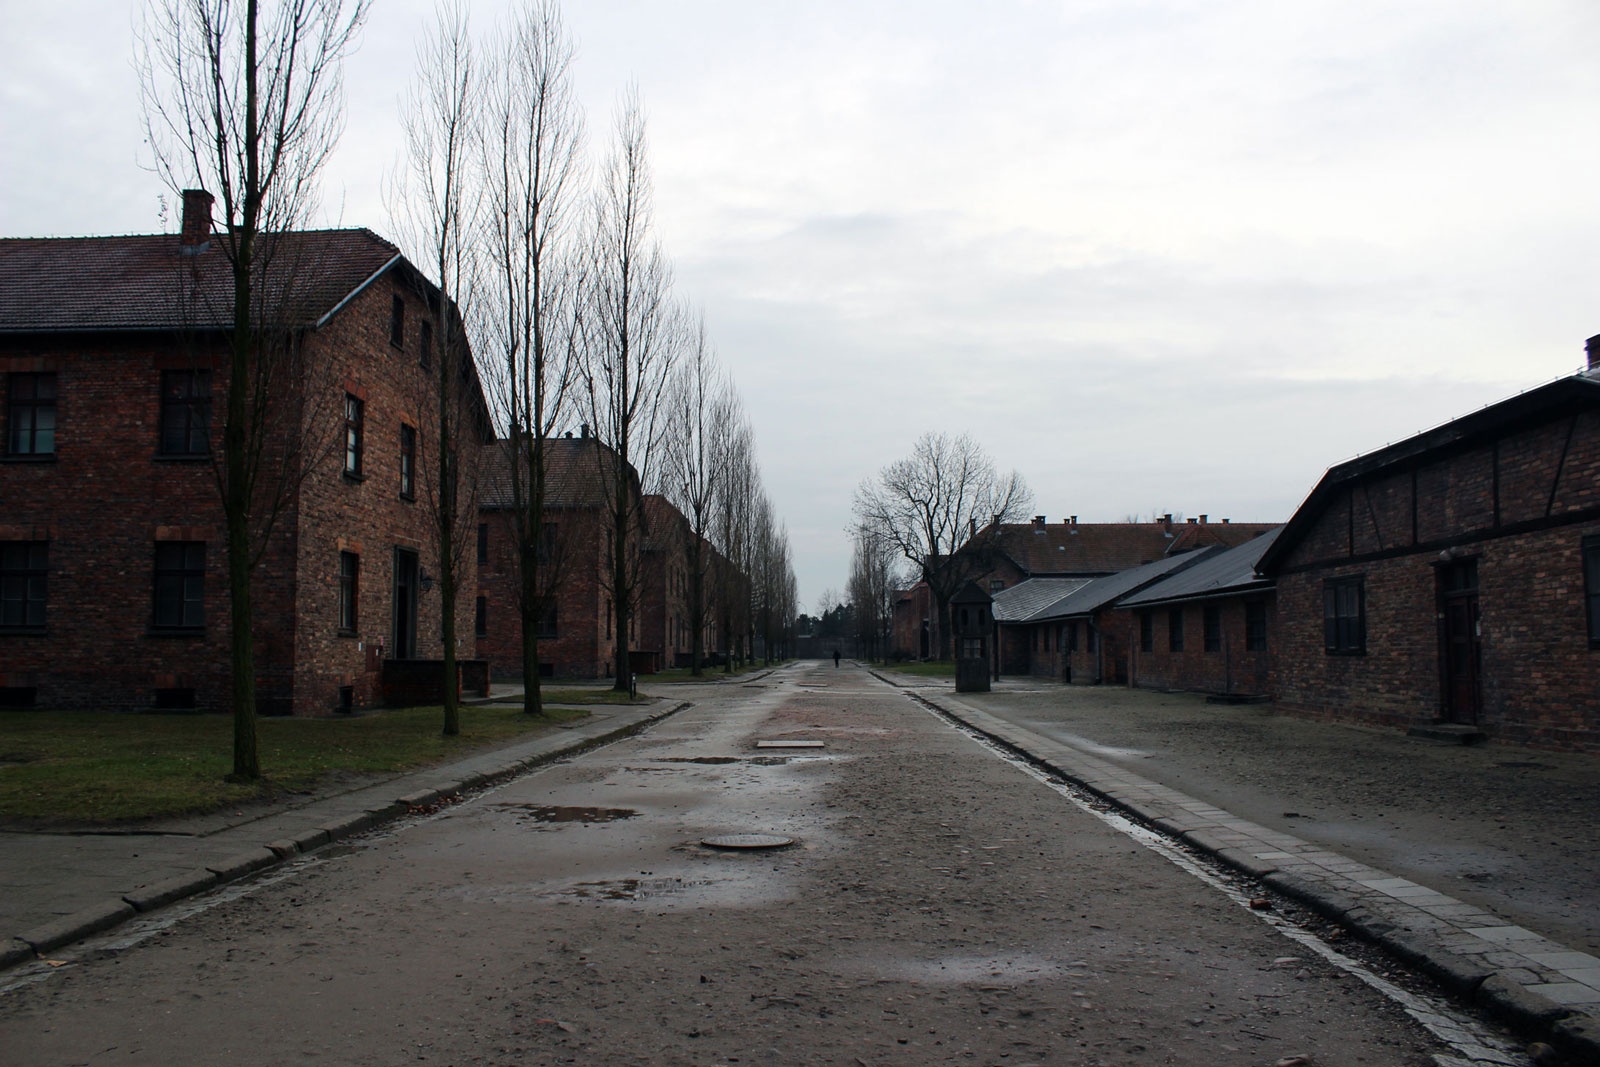 View of the first blocks after entering the camp